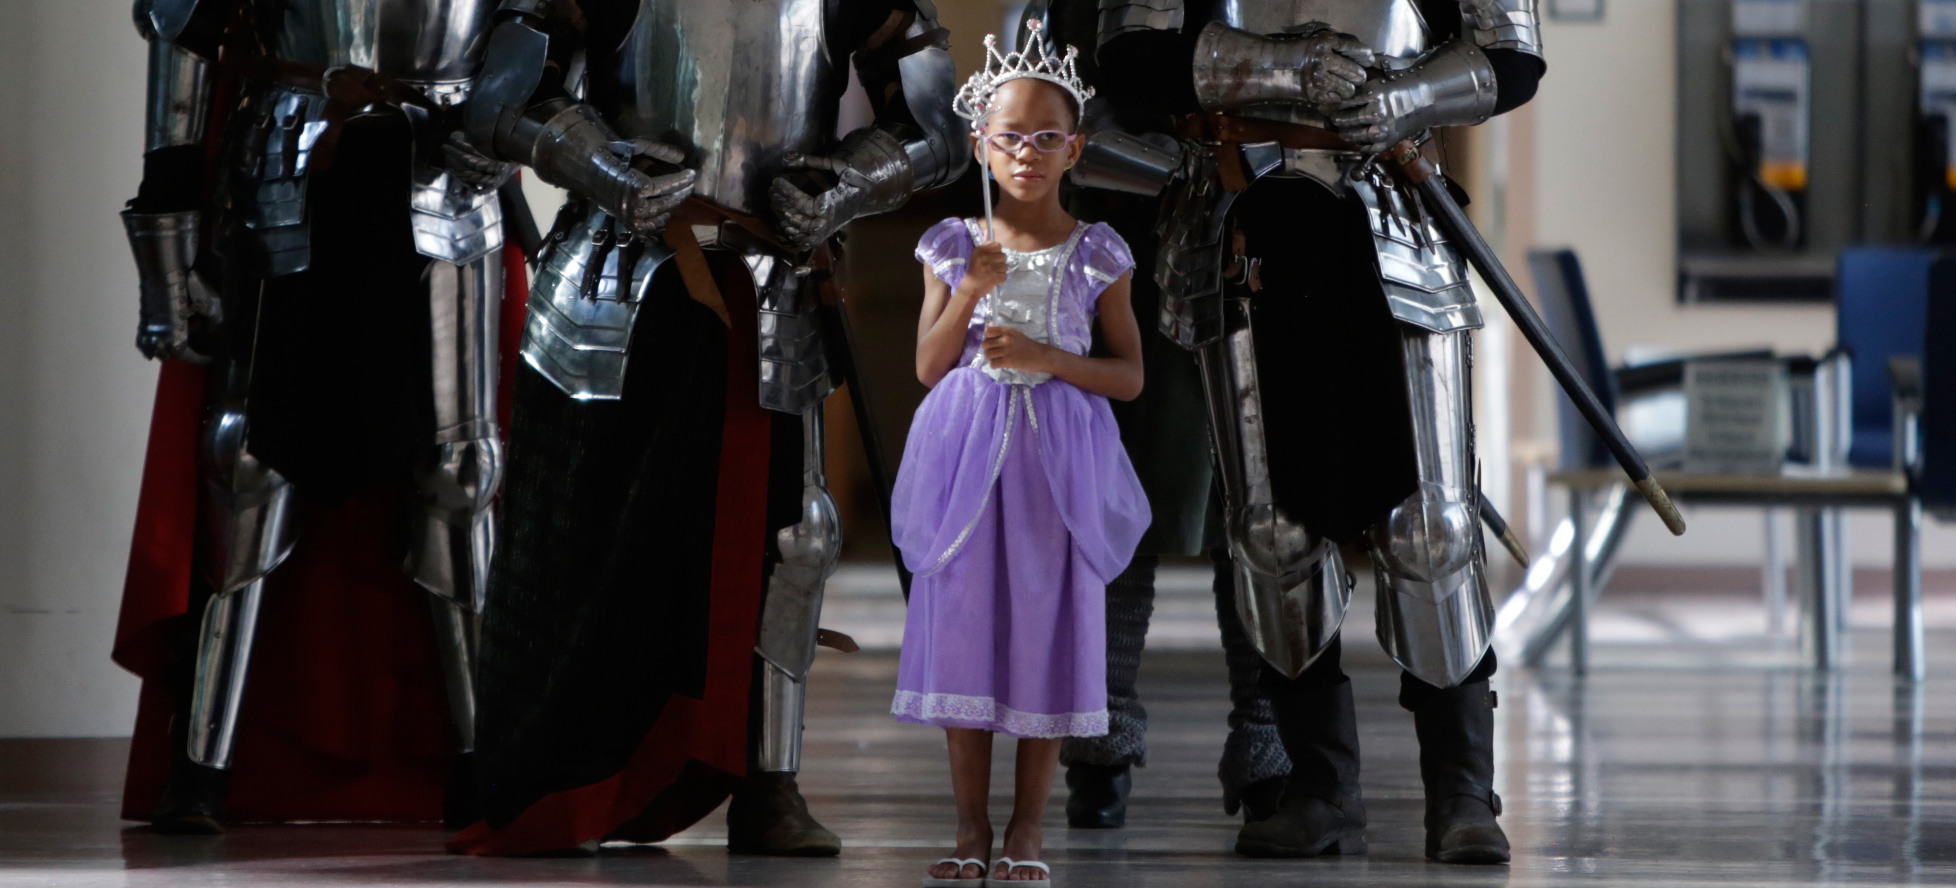 little girl dressed as princess with knights